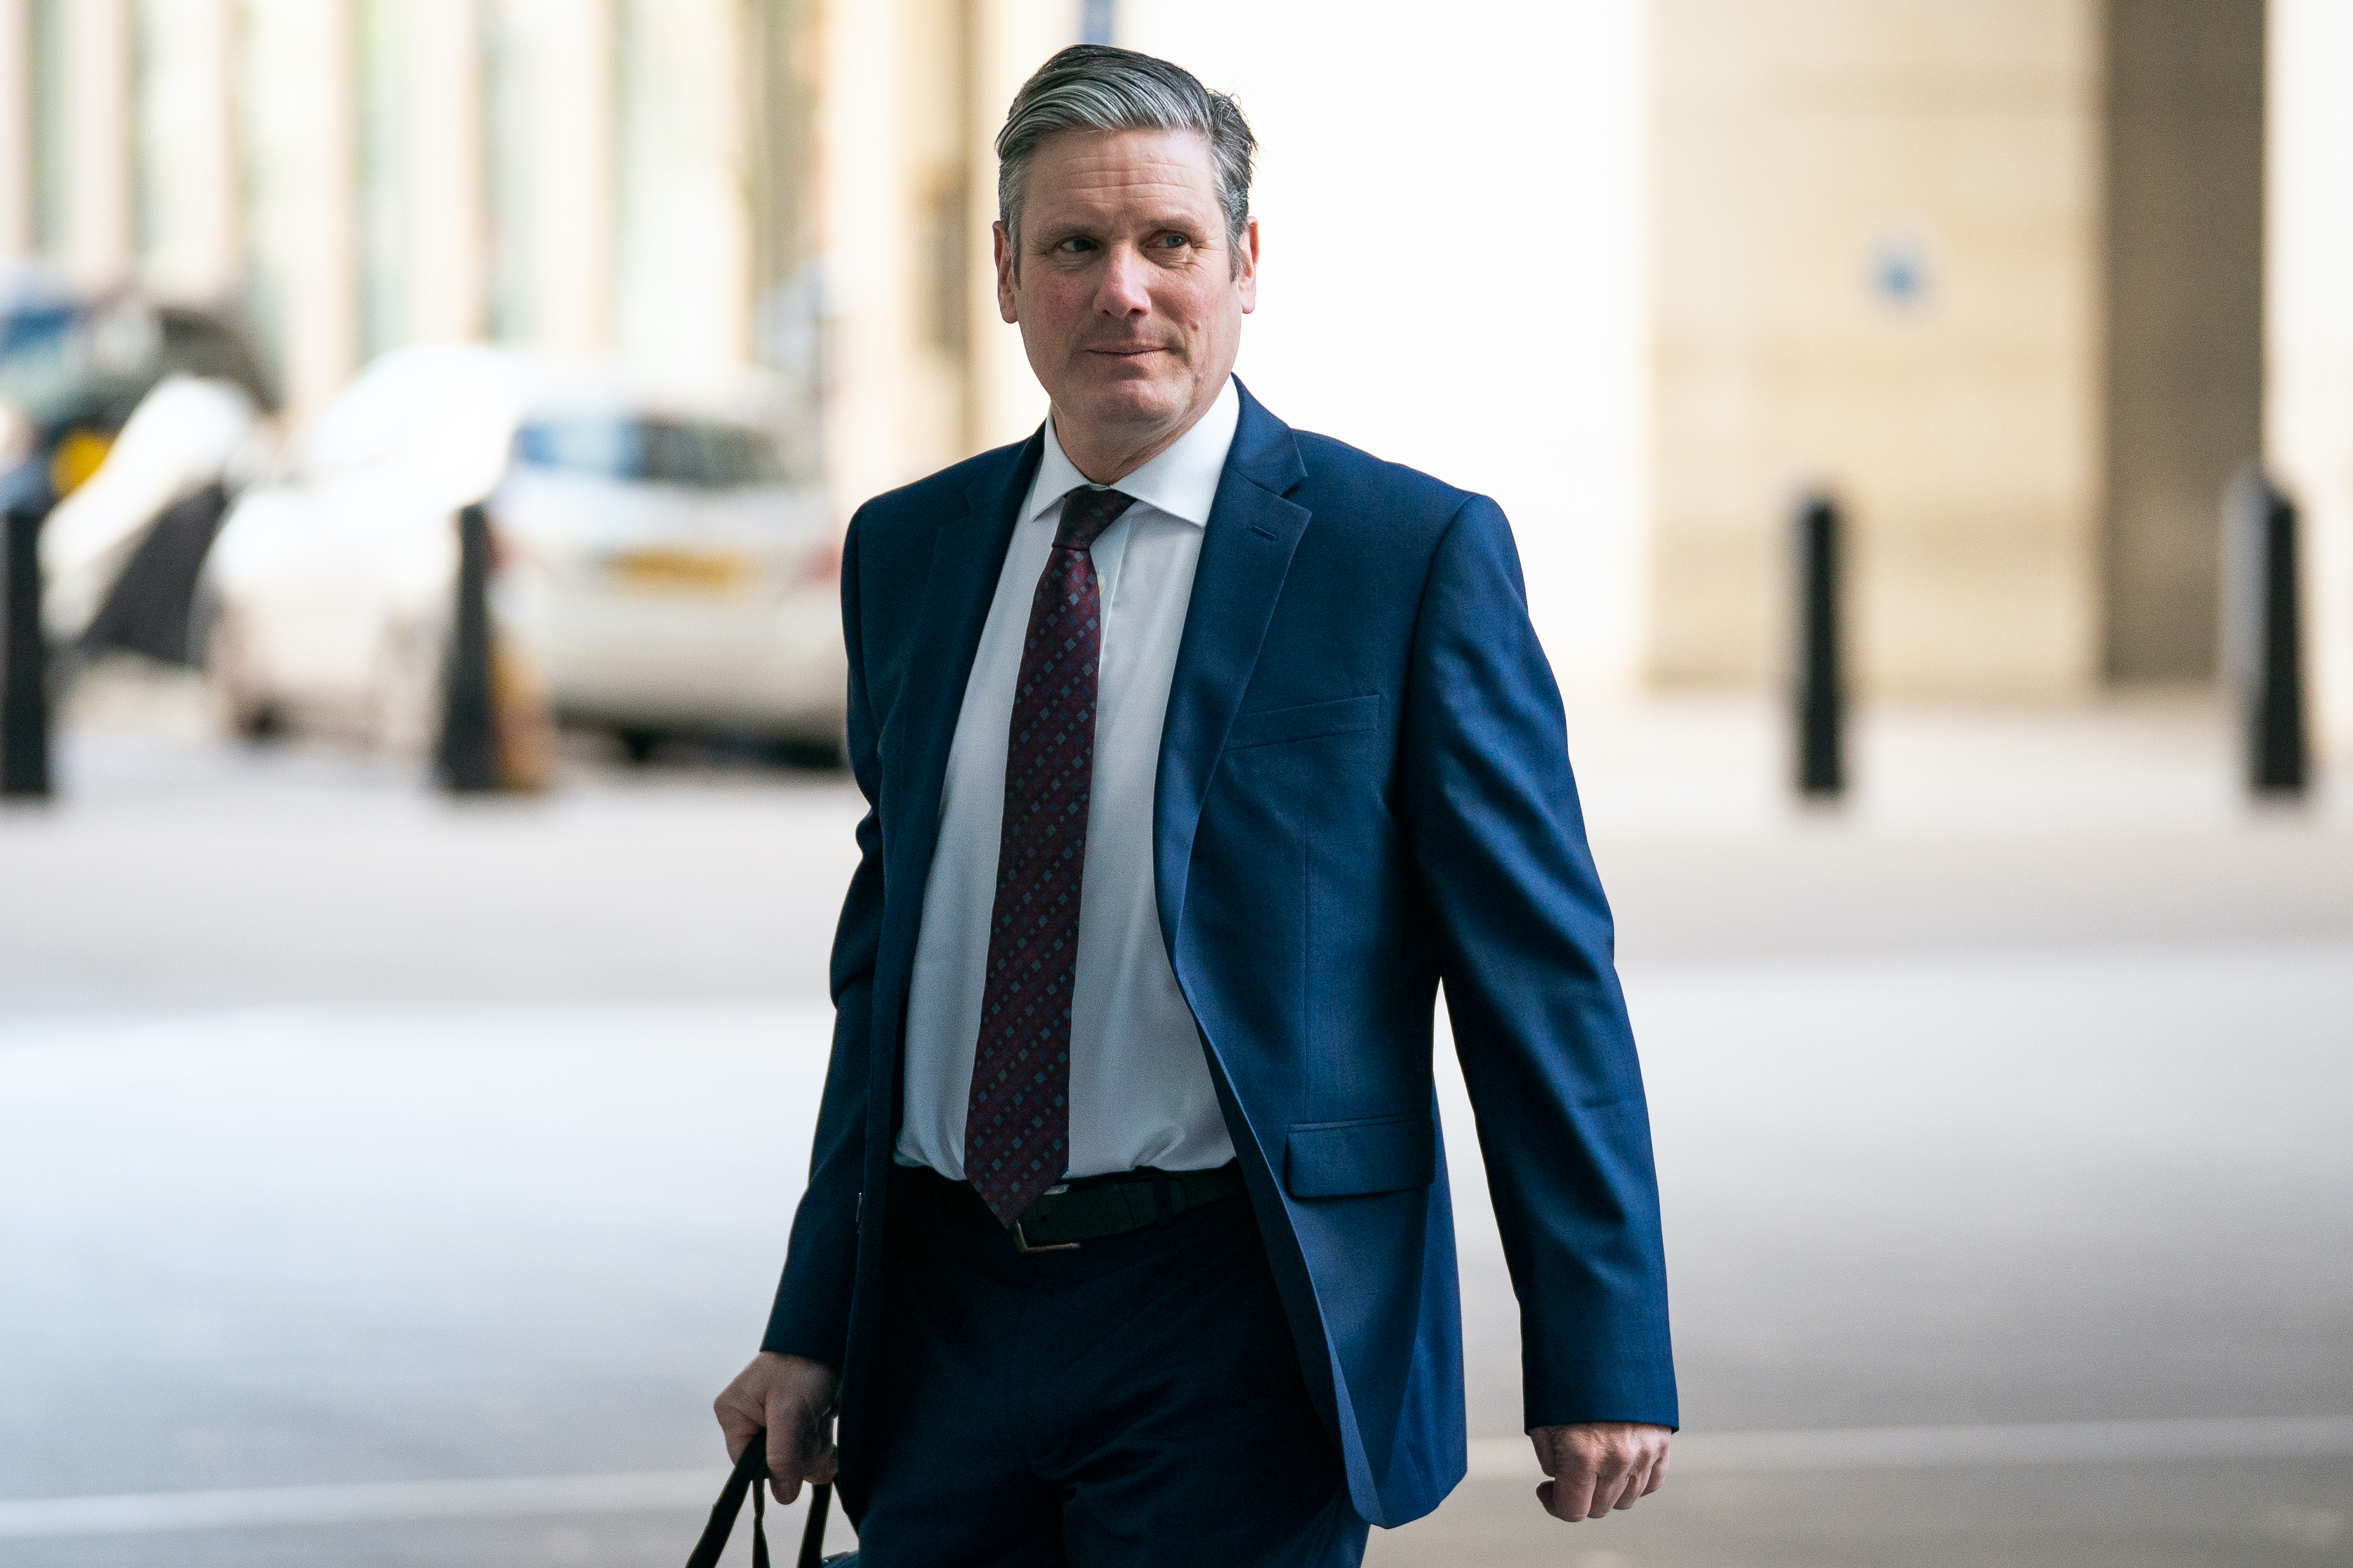 Labour returns to the mainstream with Sir Keir Starmer